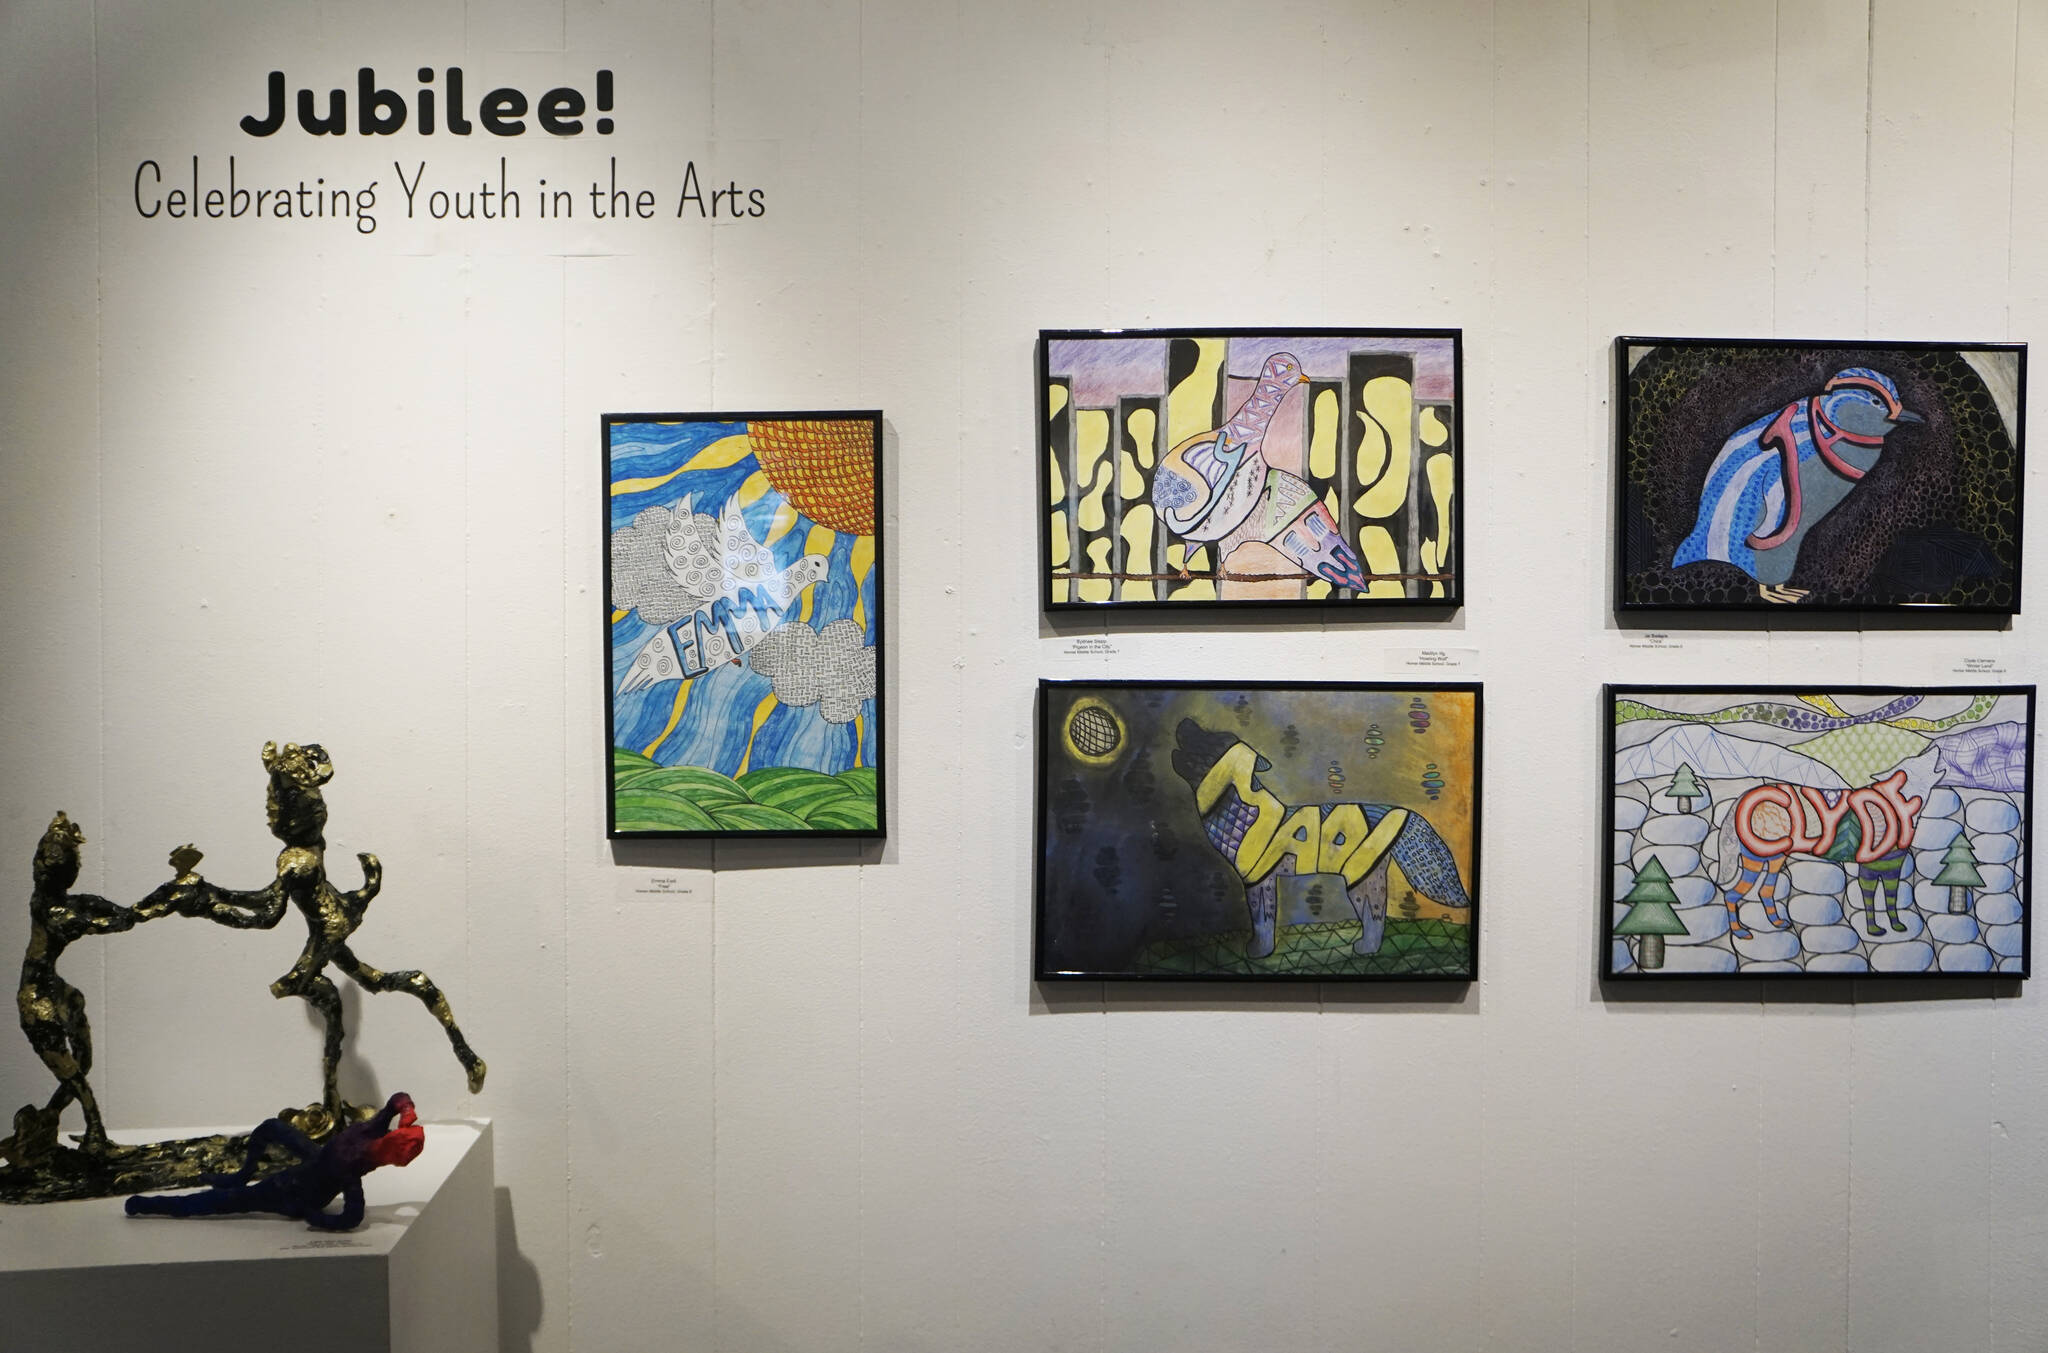 Some of the art work from the Jubilee! art show at the Homer Council on the Arts. (Photo by Michael Armstrong/Homer News)